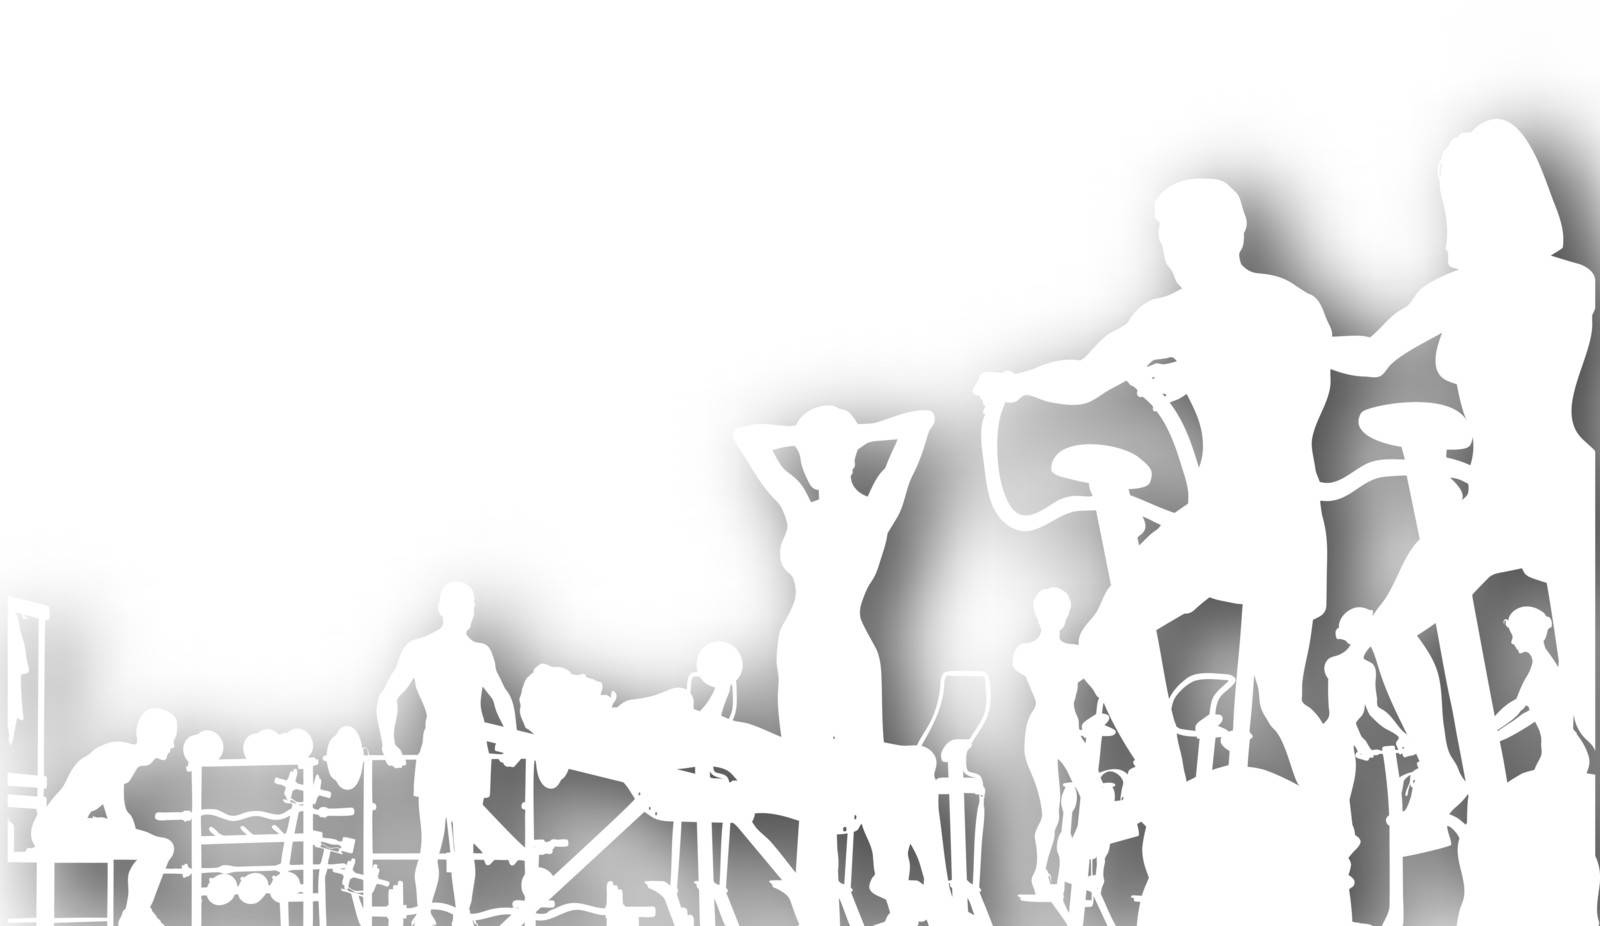 Editable vector cutout of people exercising in a gym with background shadow made using a gradient mesh